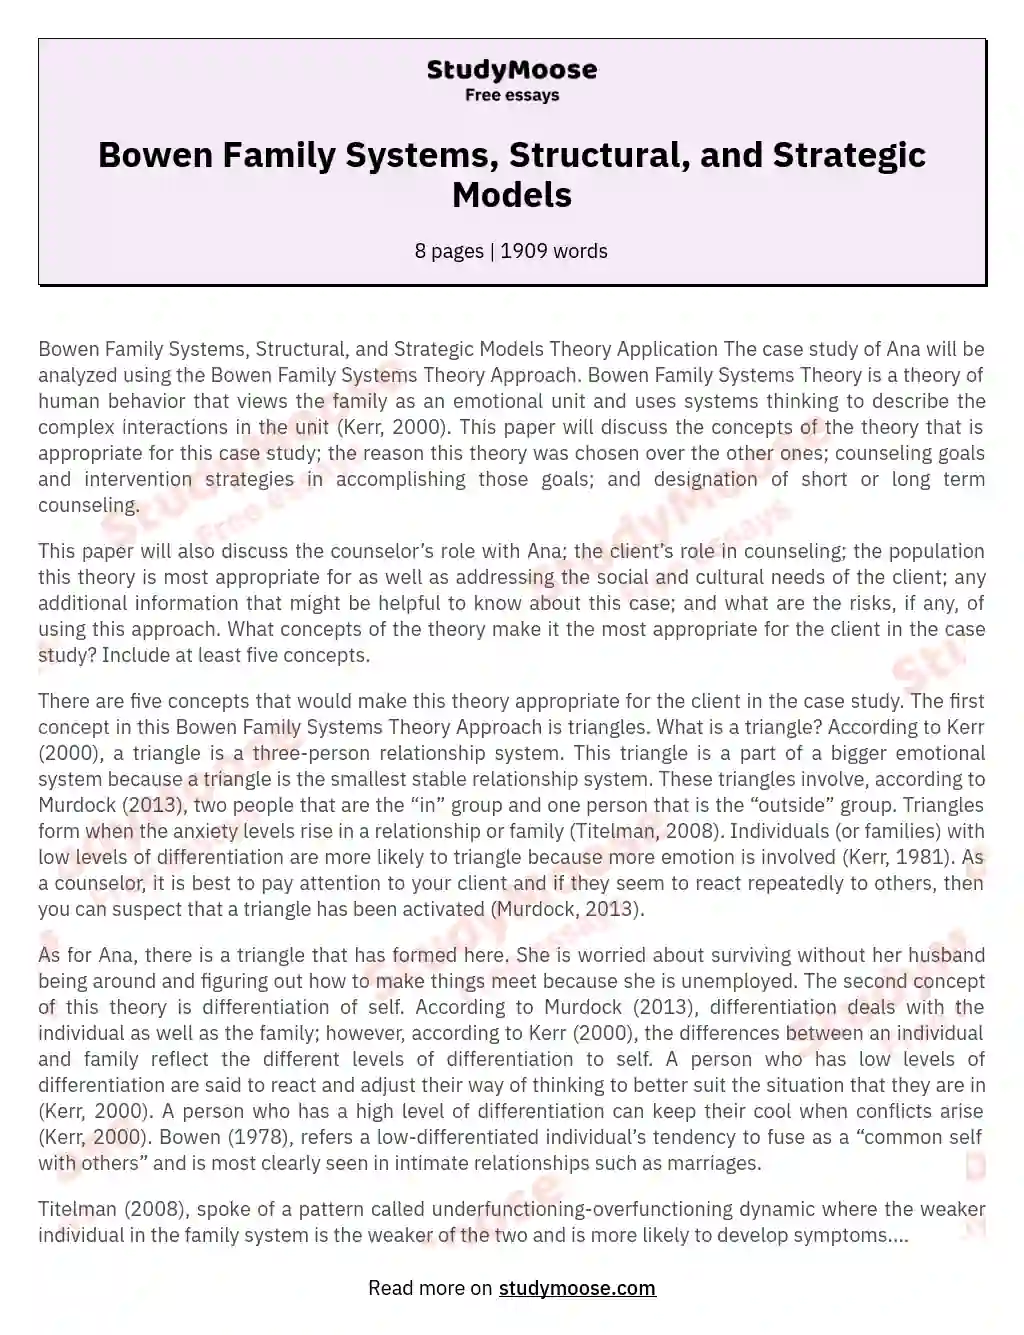 Bowen Family Systems, Structural, and Strategic Models